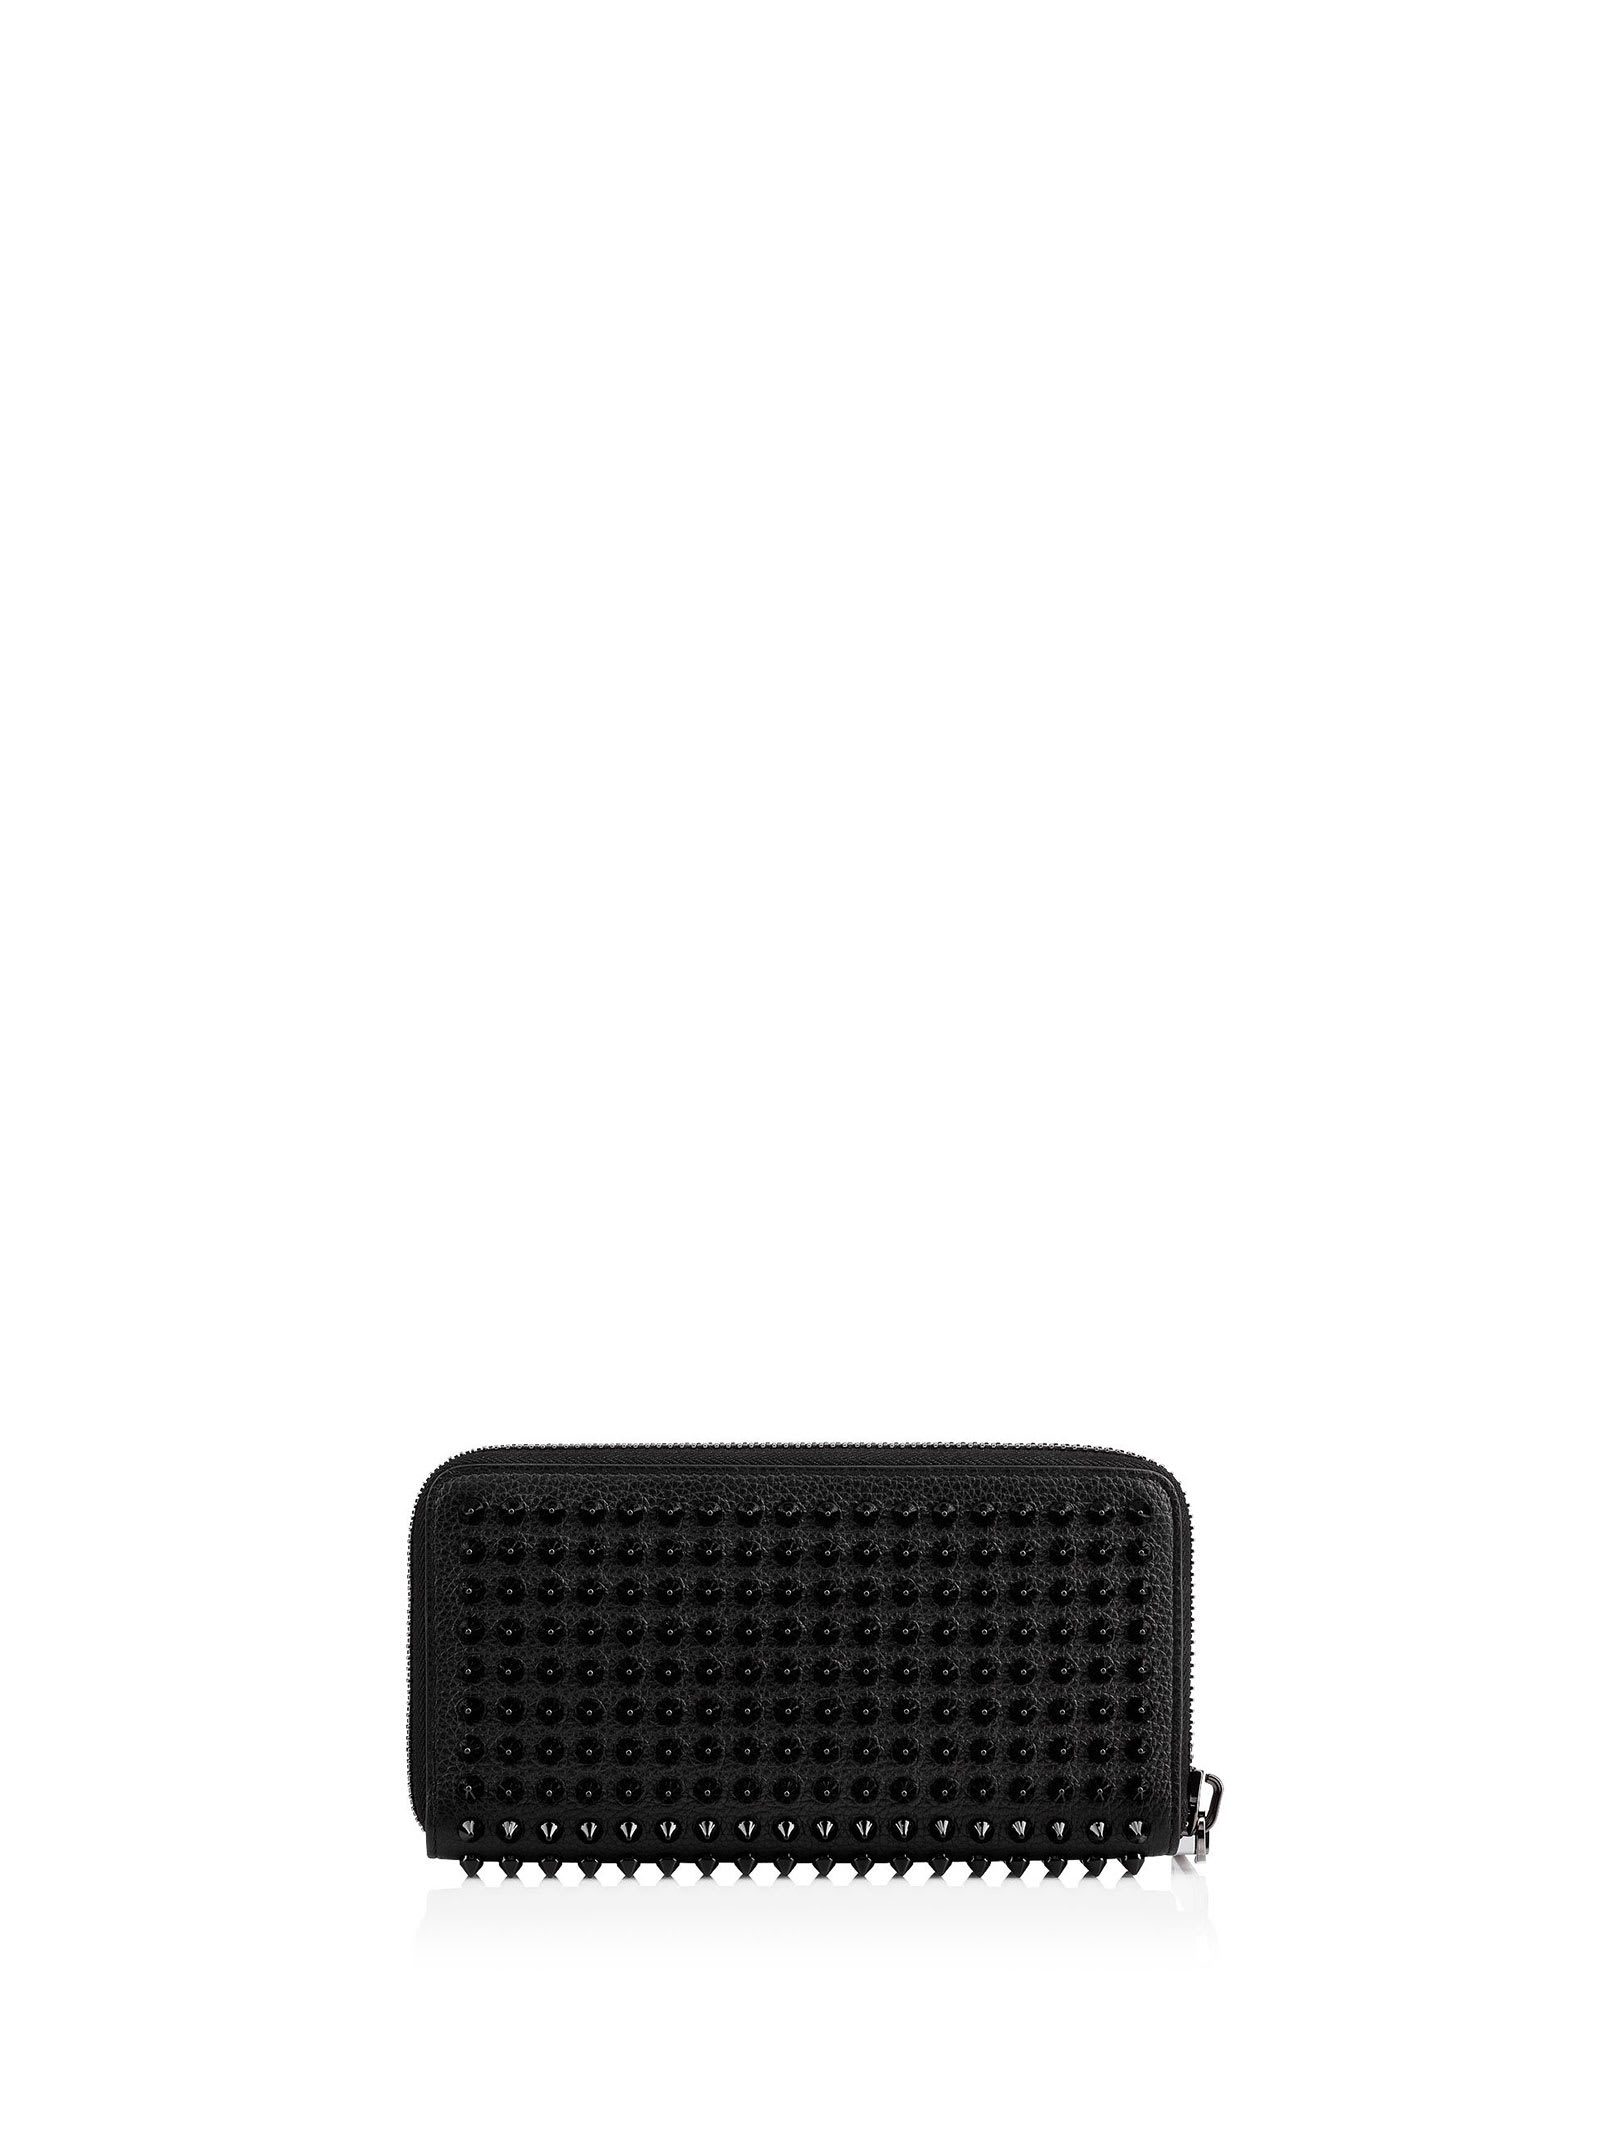 Christian Louboutin Panettone Leather Wallet With Studs